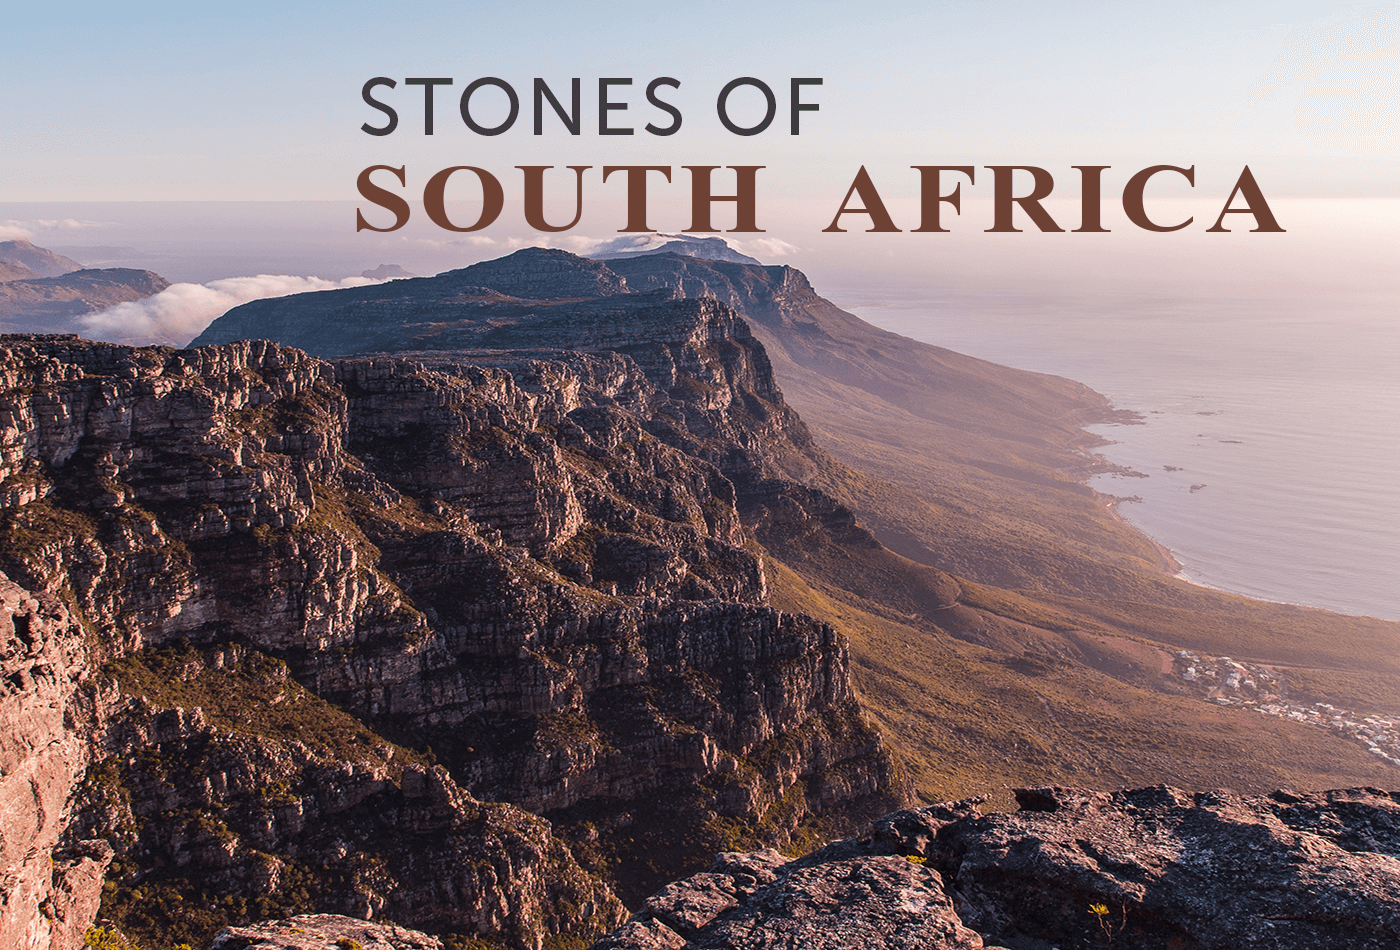 Stones of South Africa